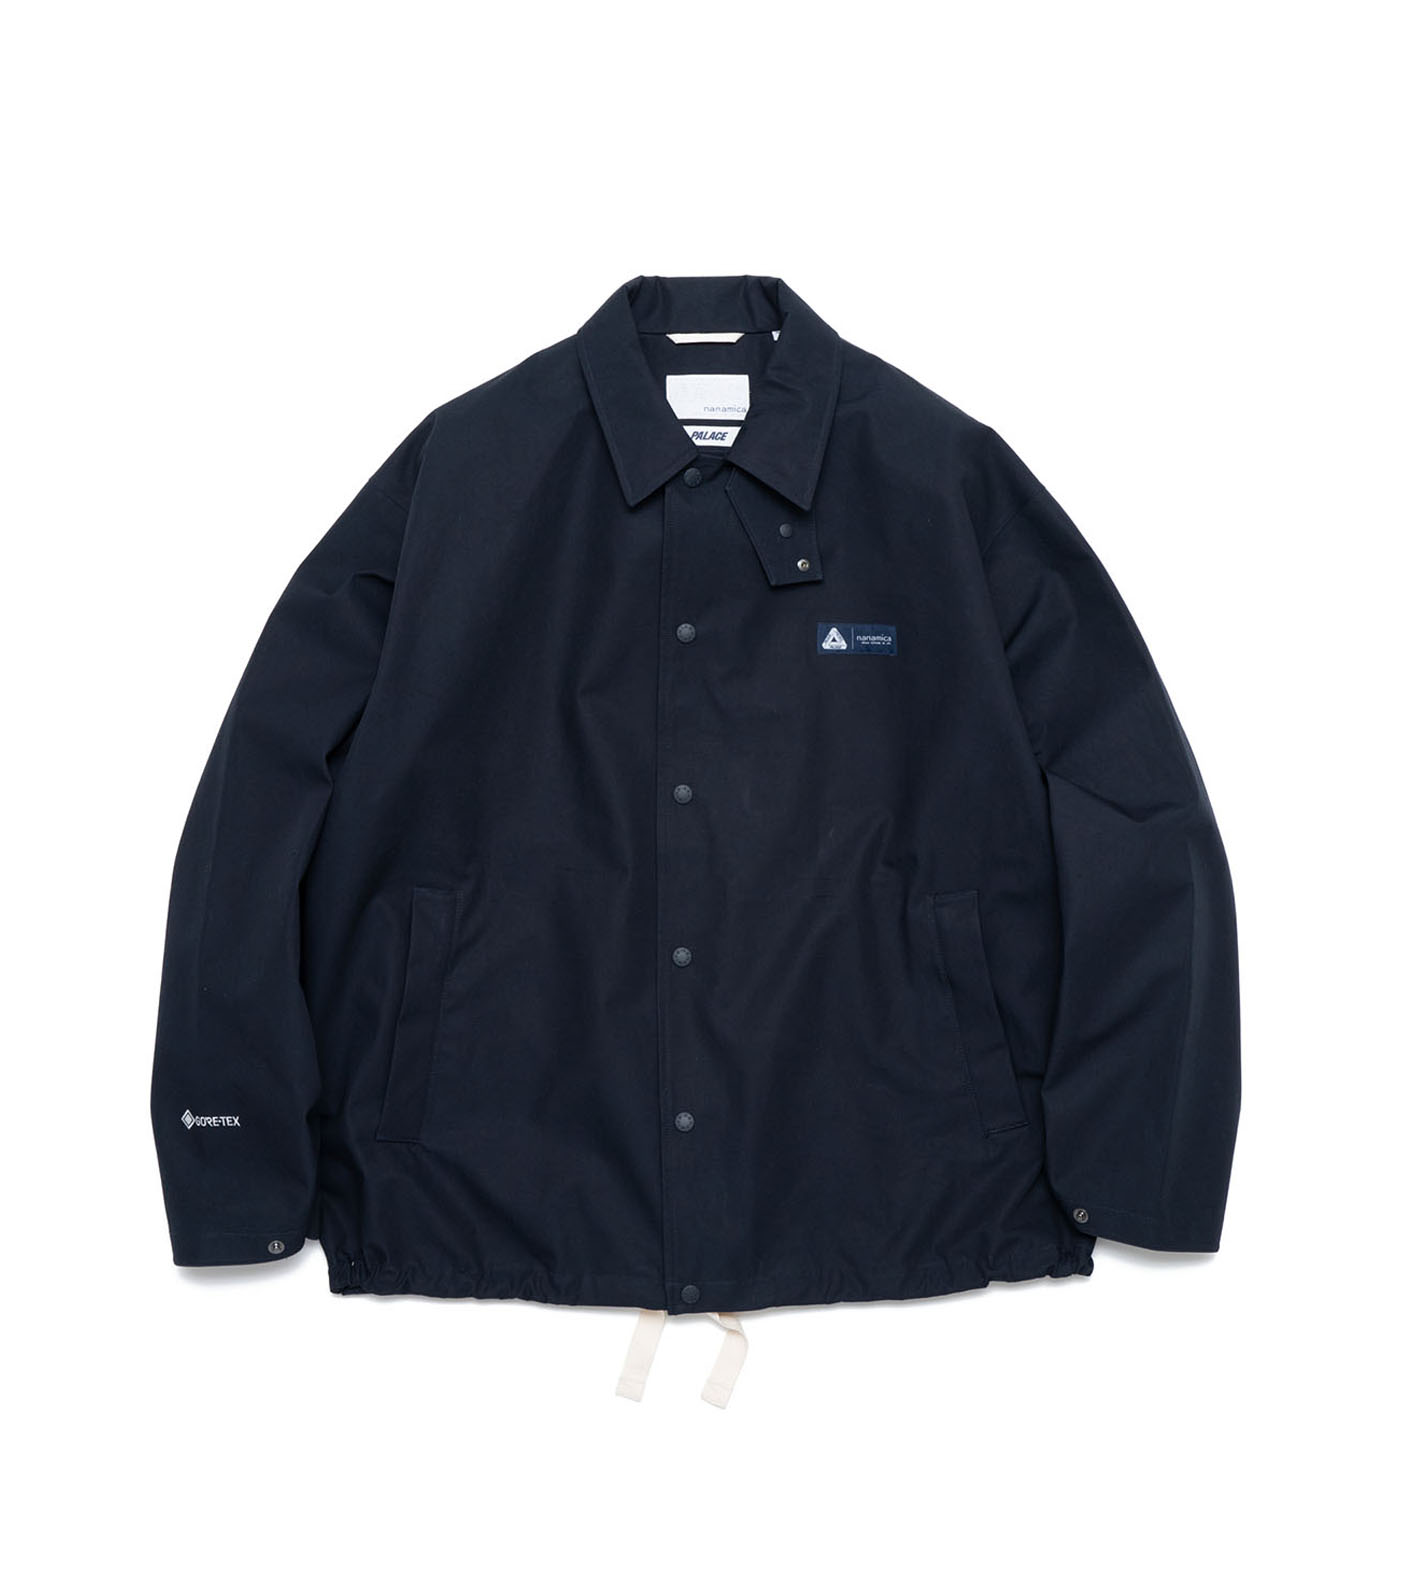 PALACE SKATE THE NORTH FACE coach jacket